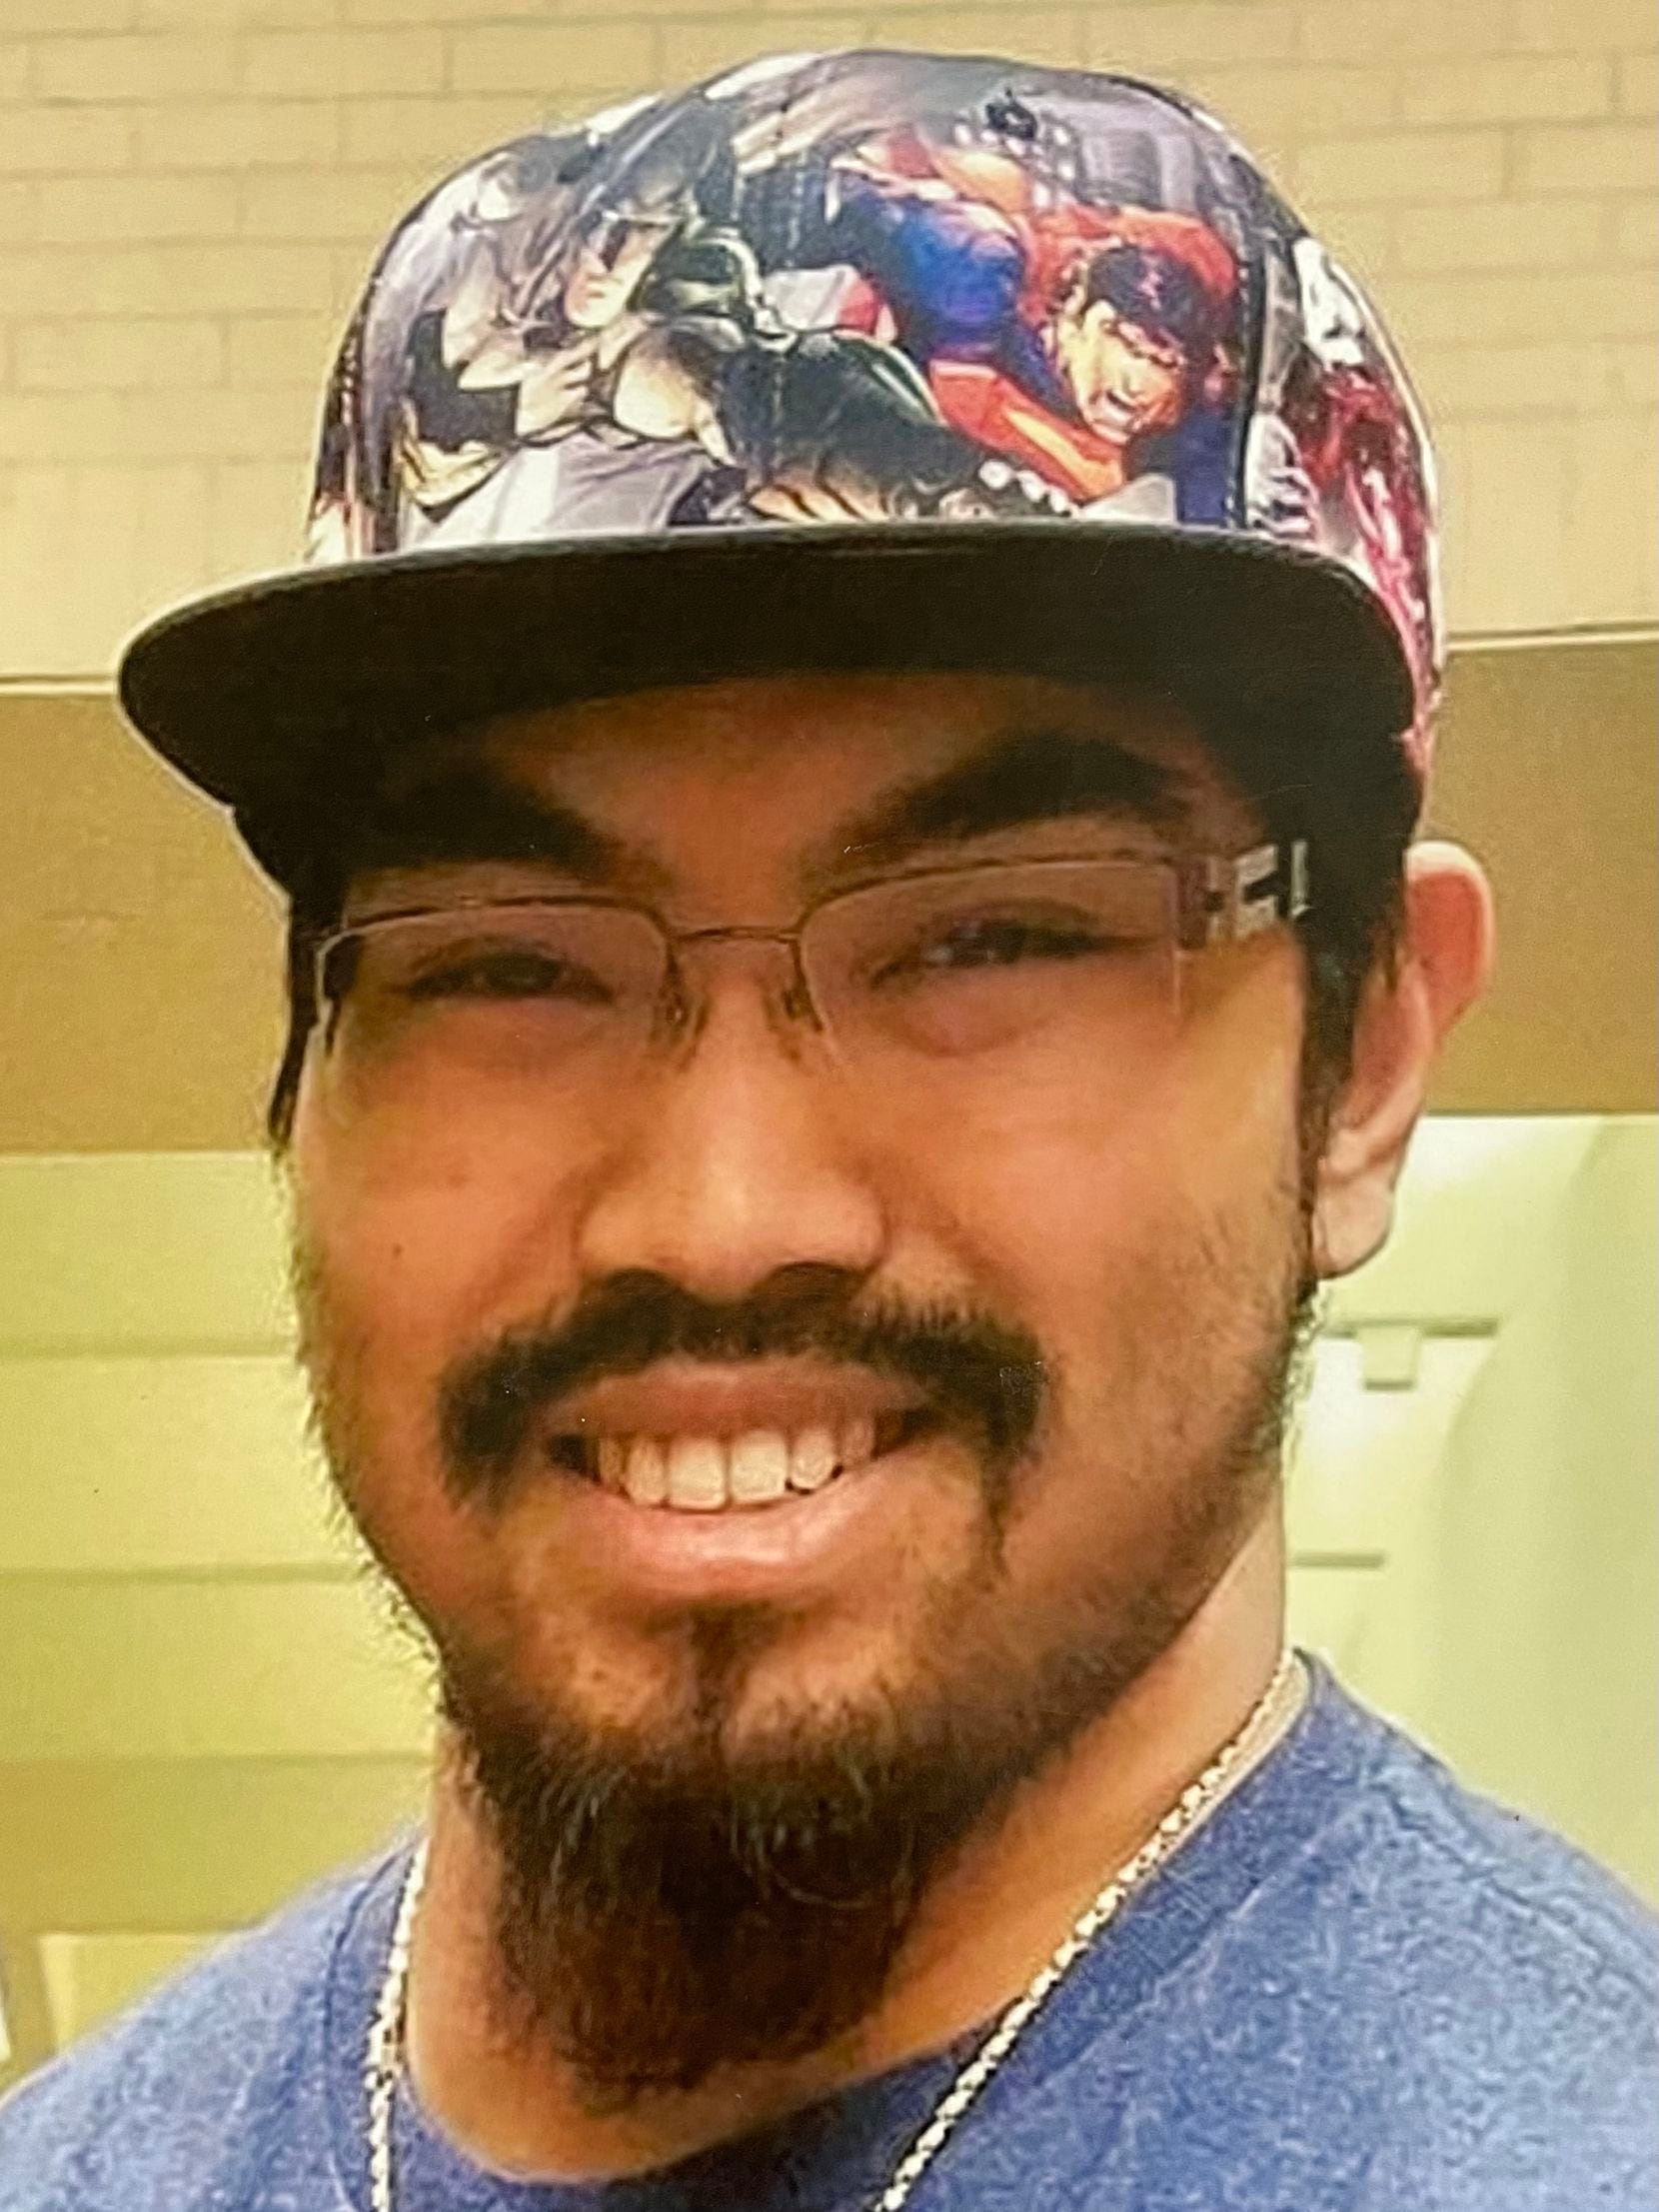 Heng Lam was killed during a robbery May 22, 2019, while working his shift as a store clerk...